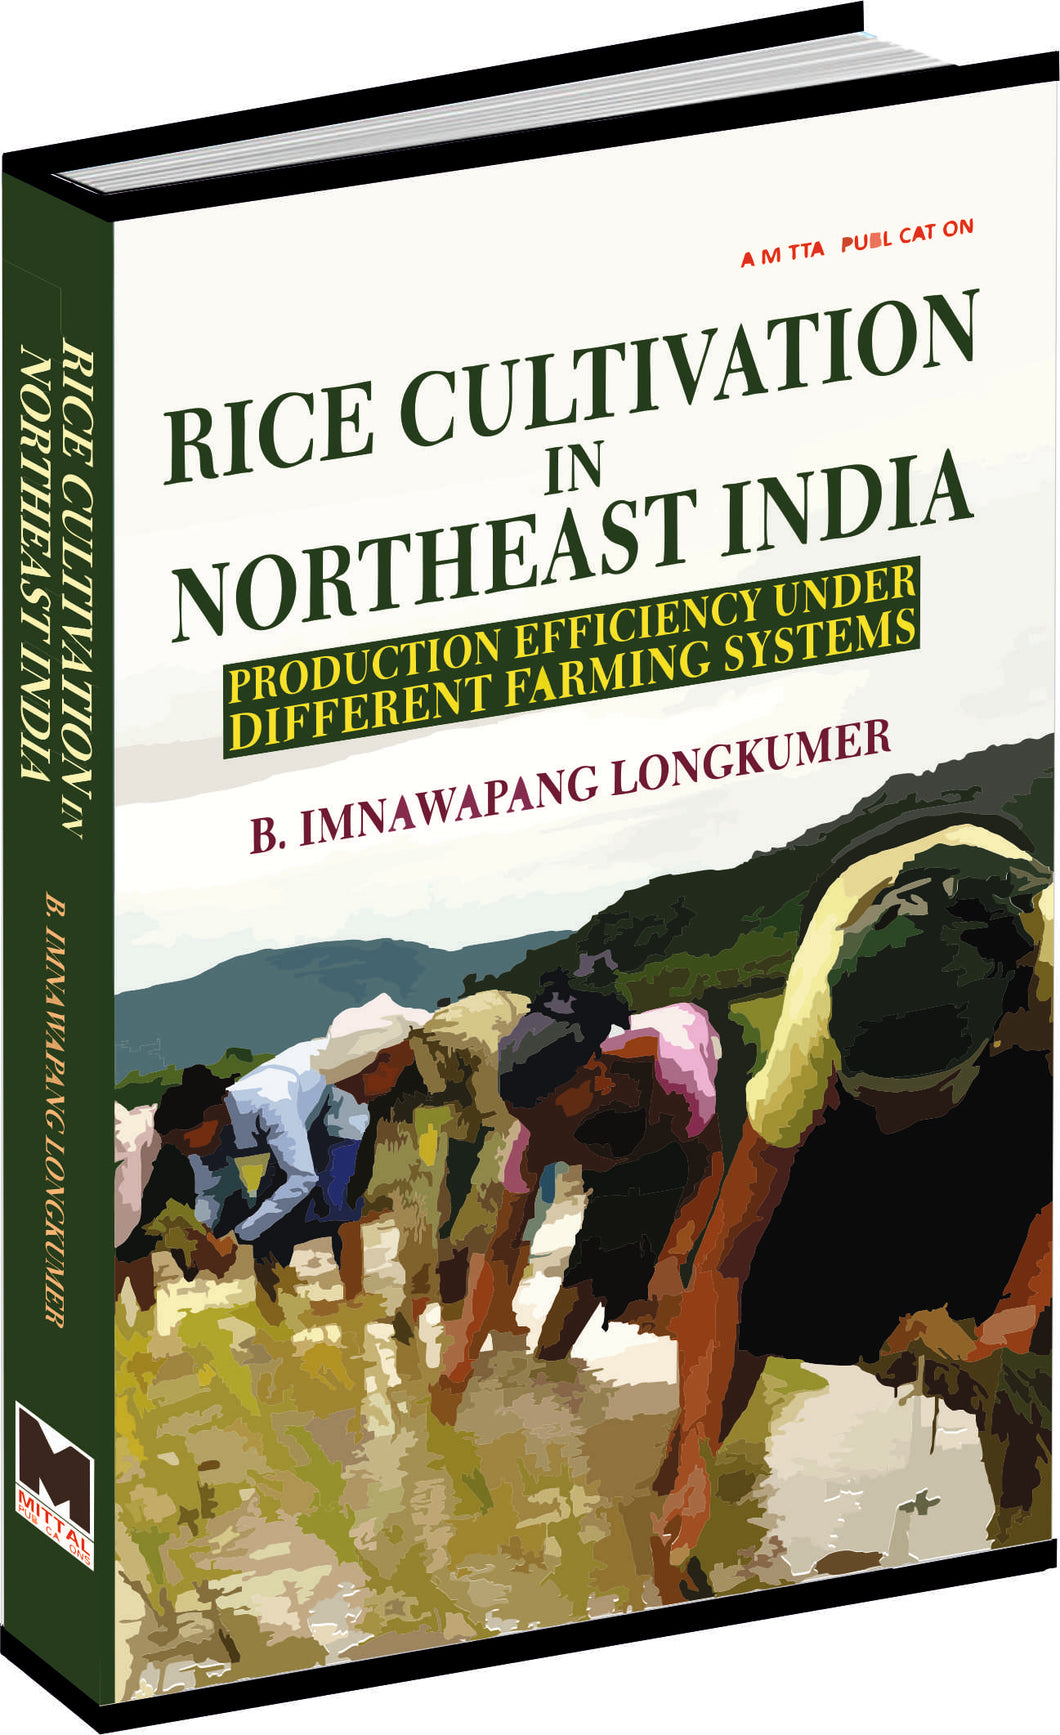 Rice Cultivation In Northeast India: Production Efficiency Under Different Farming Systems by B. Imnawapang Longkumer